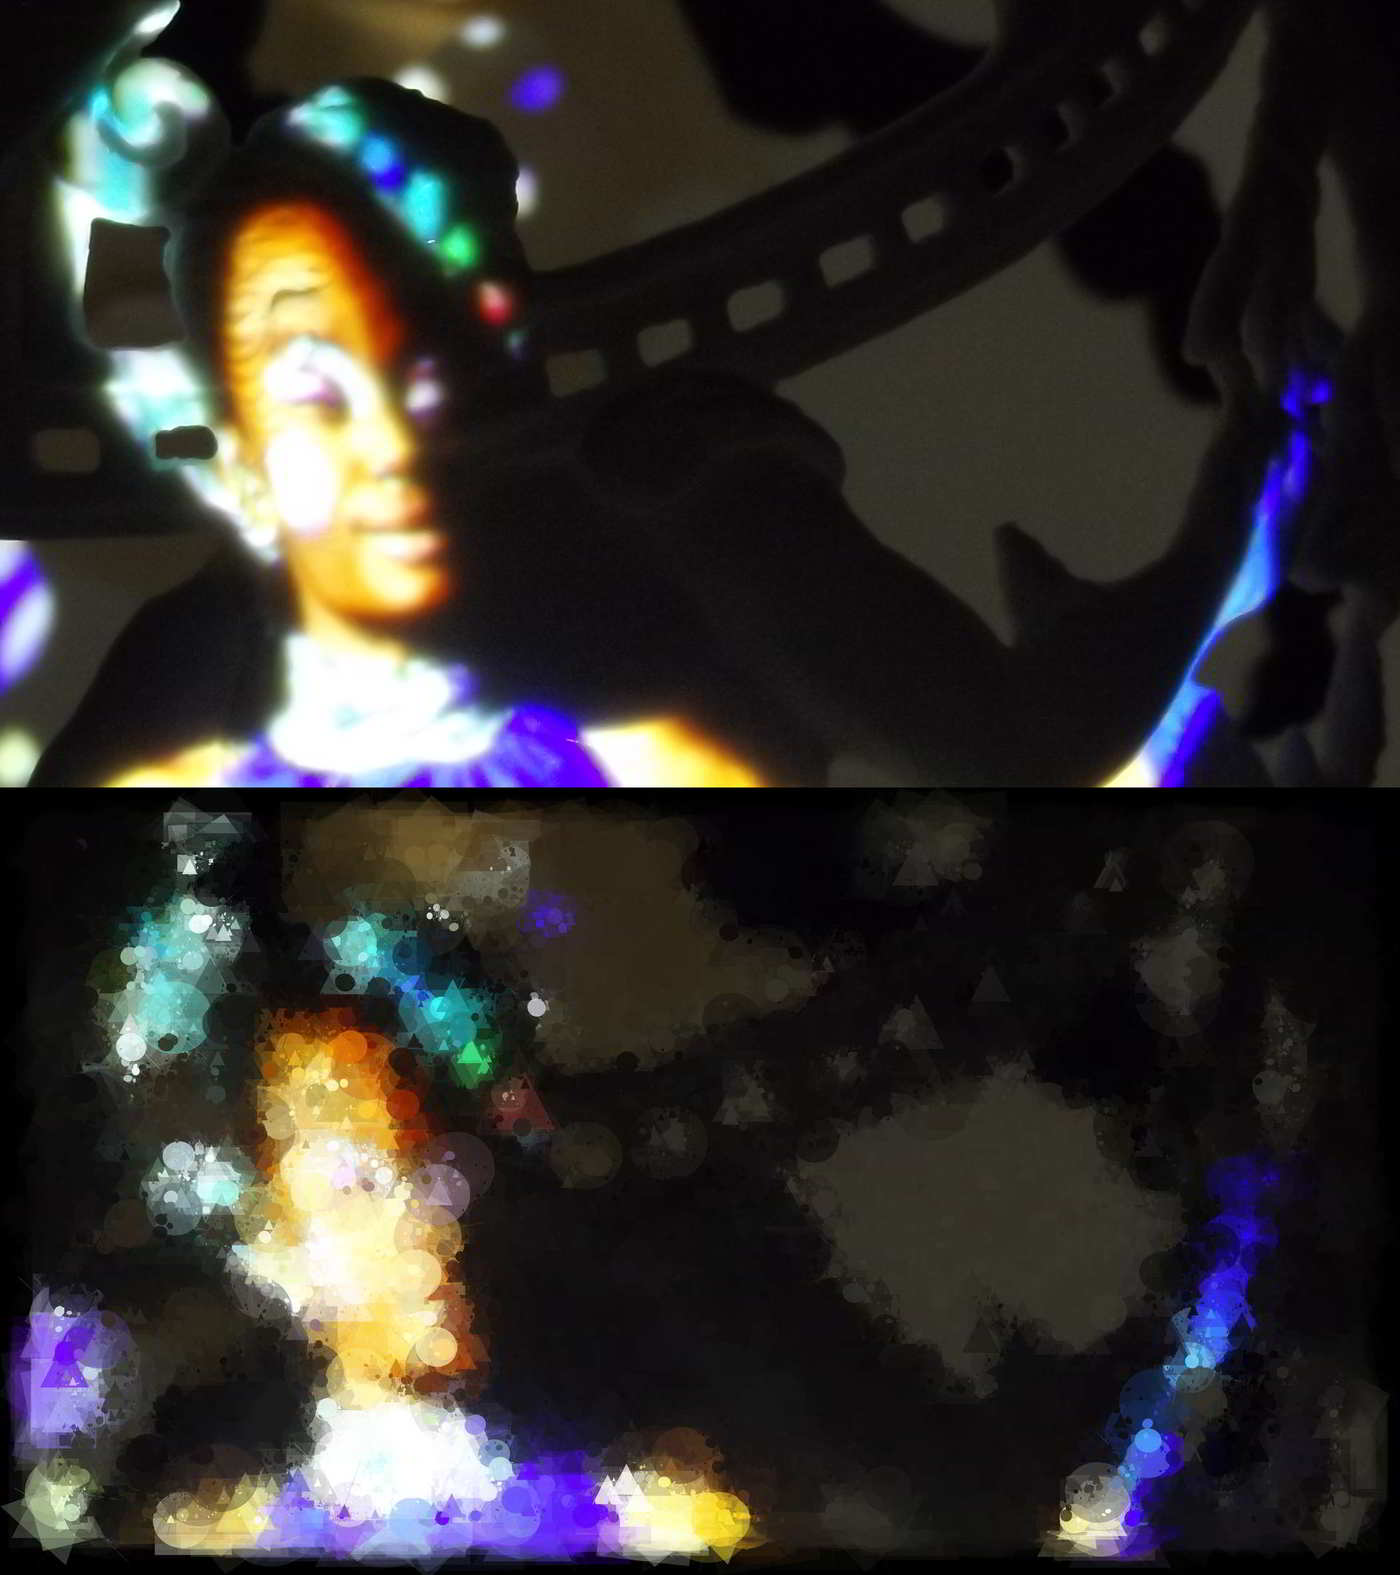 A close up of a person projected on an egg, photo above, generated image below.